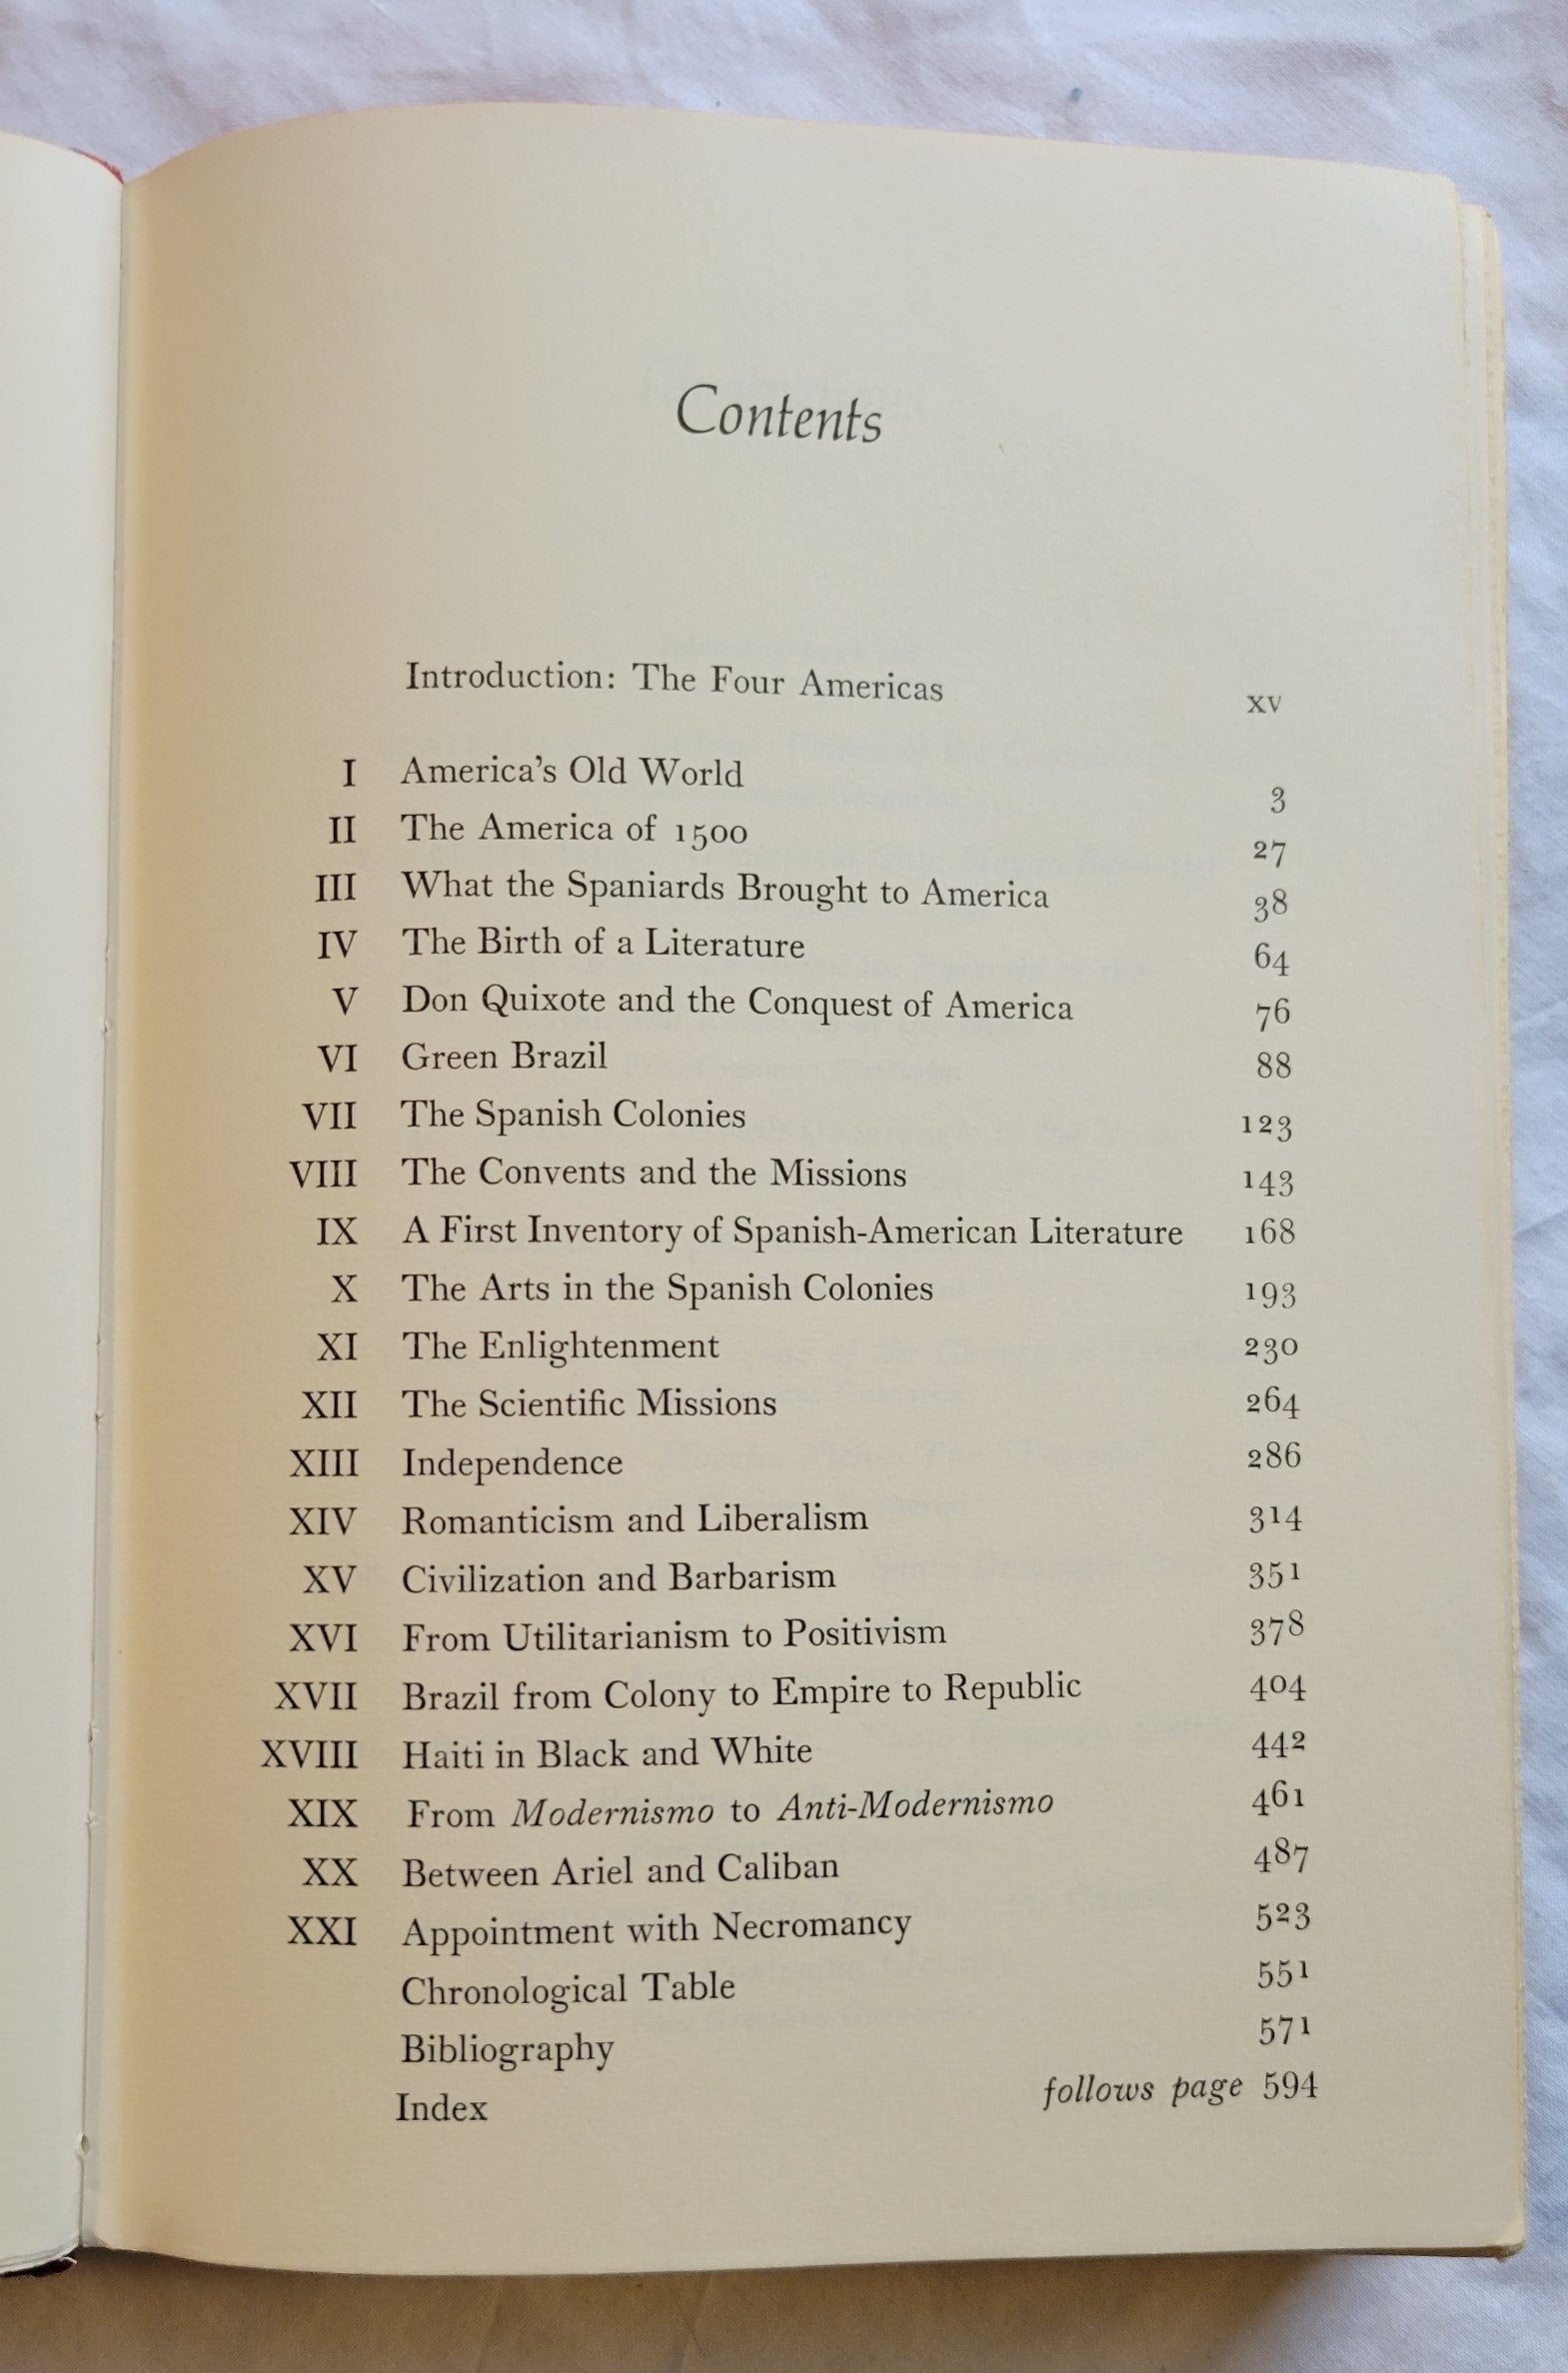 Vintage book for sale, “Latin America: A Cultural History, First American Edition” by German Arciniegas, published by Alfred A. Knopf, Inc., copyright 1966.  View of table of contents